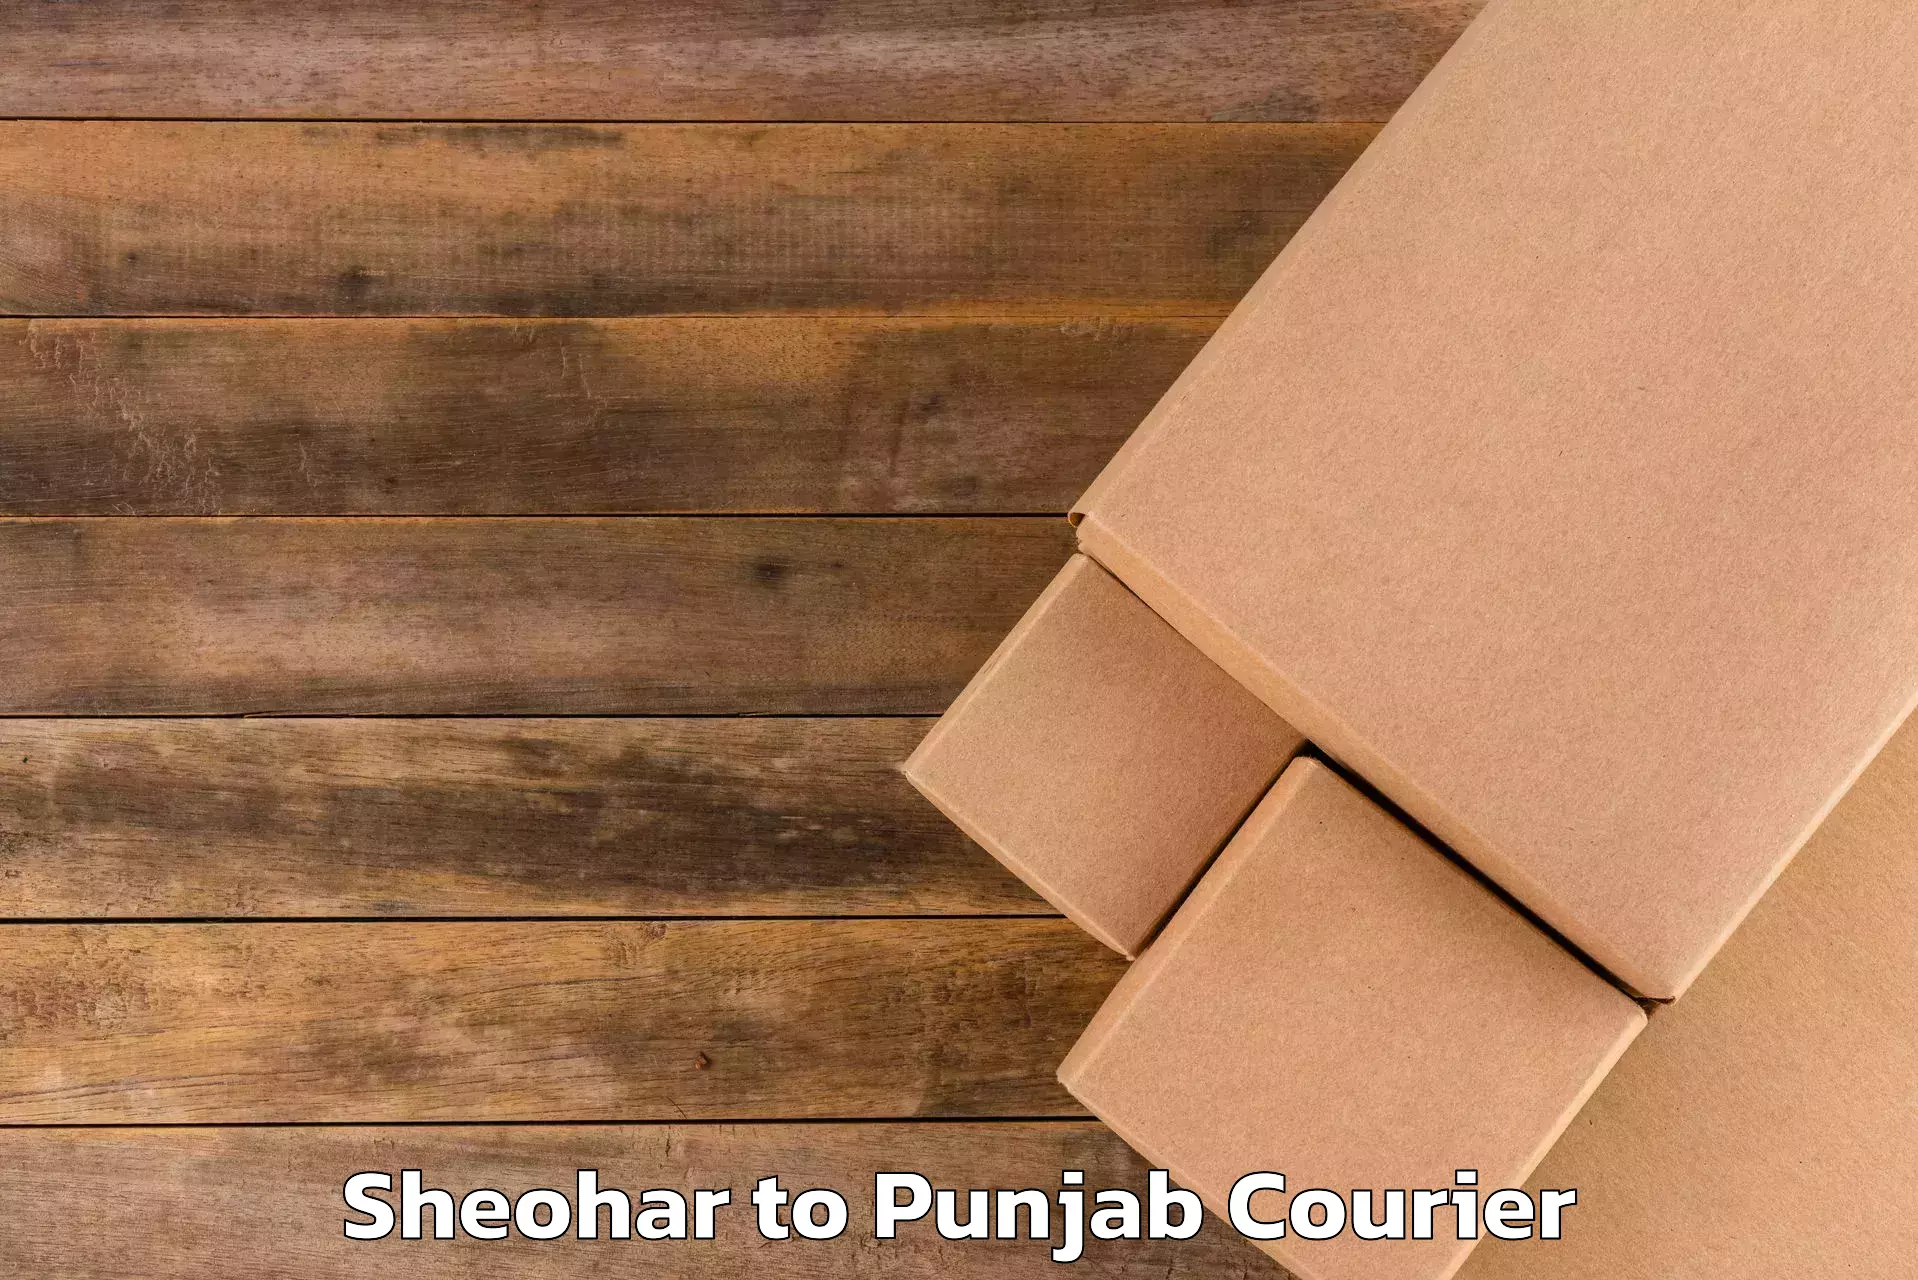 Luggage forwarding service Sheohar to Sultanpur Lodhi